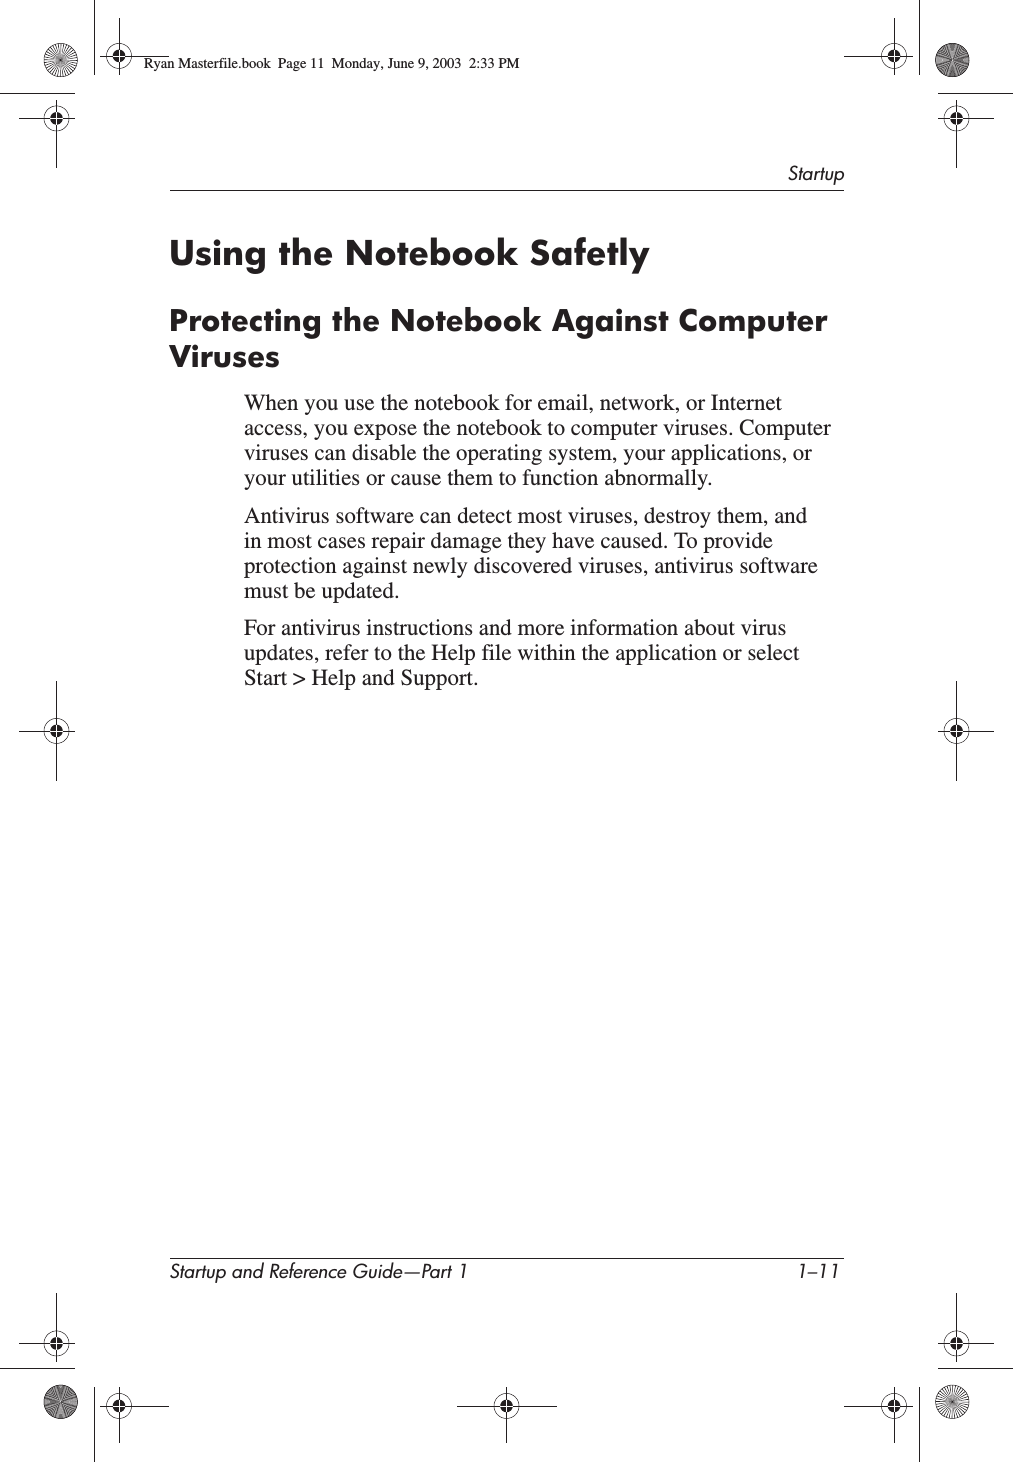 StartupStartup and Reference Guide—Part 1 1–11Using the Notebook SafetlyProtecting the Notebook Against Computer VirusesWhen you use the notebook for email, network, or Internet access, you expose the notebook to computer viruses. Computer viruses can disable the operating system, your applications, or your utilities or cause them to function abnormally.Antivirus software can detect most viruses, destroy them, and in most cases repair damage they have caused. To provide protection against newly discovered viruses, antivirus software must be updated. For antivirus instructions and more information about virus updates, refer to the Help file within the application or select Start &gt; Help and Support.Ryan Masterfile.book  Page 11  Monday, June 9, 2003  2:33 PM